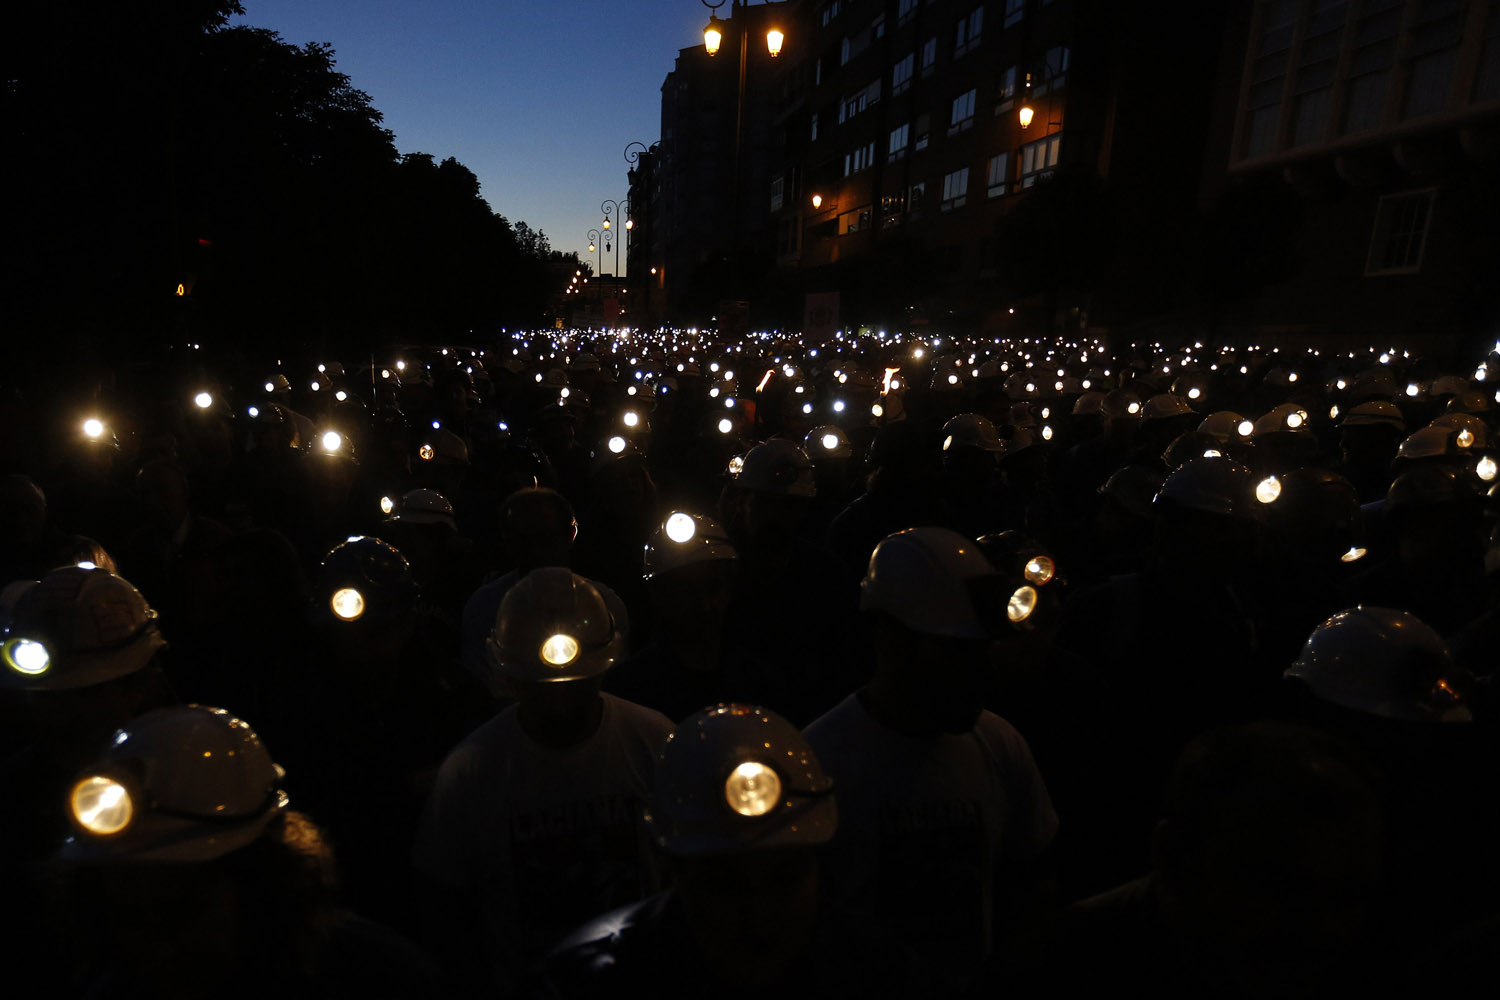 June 12, 2012. Spanish coal miners demonstrate with their lamps lit through the streets of the city of Leon, northern Spain. Spanish coal miners are staging a nationwide strike action organized by unions opposed to subsidy reductions from 300 million euros to 110 million euros.